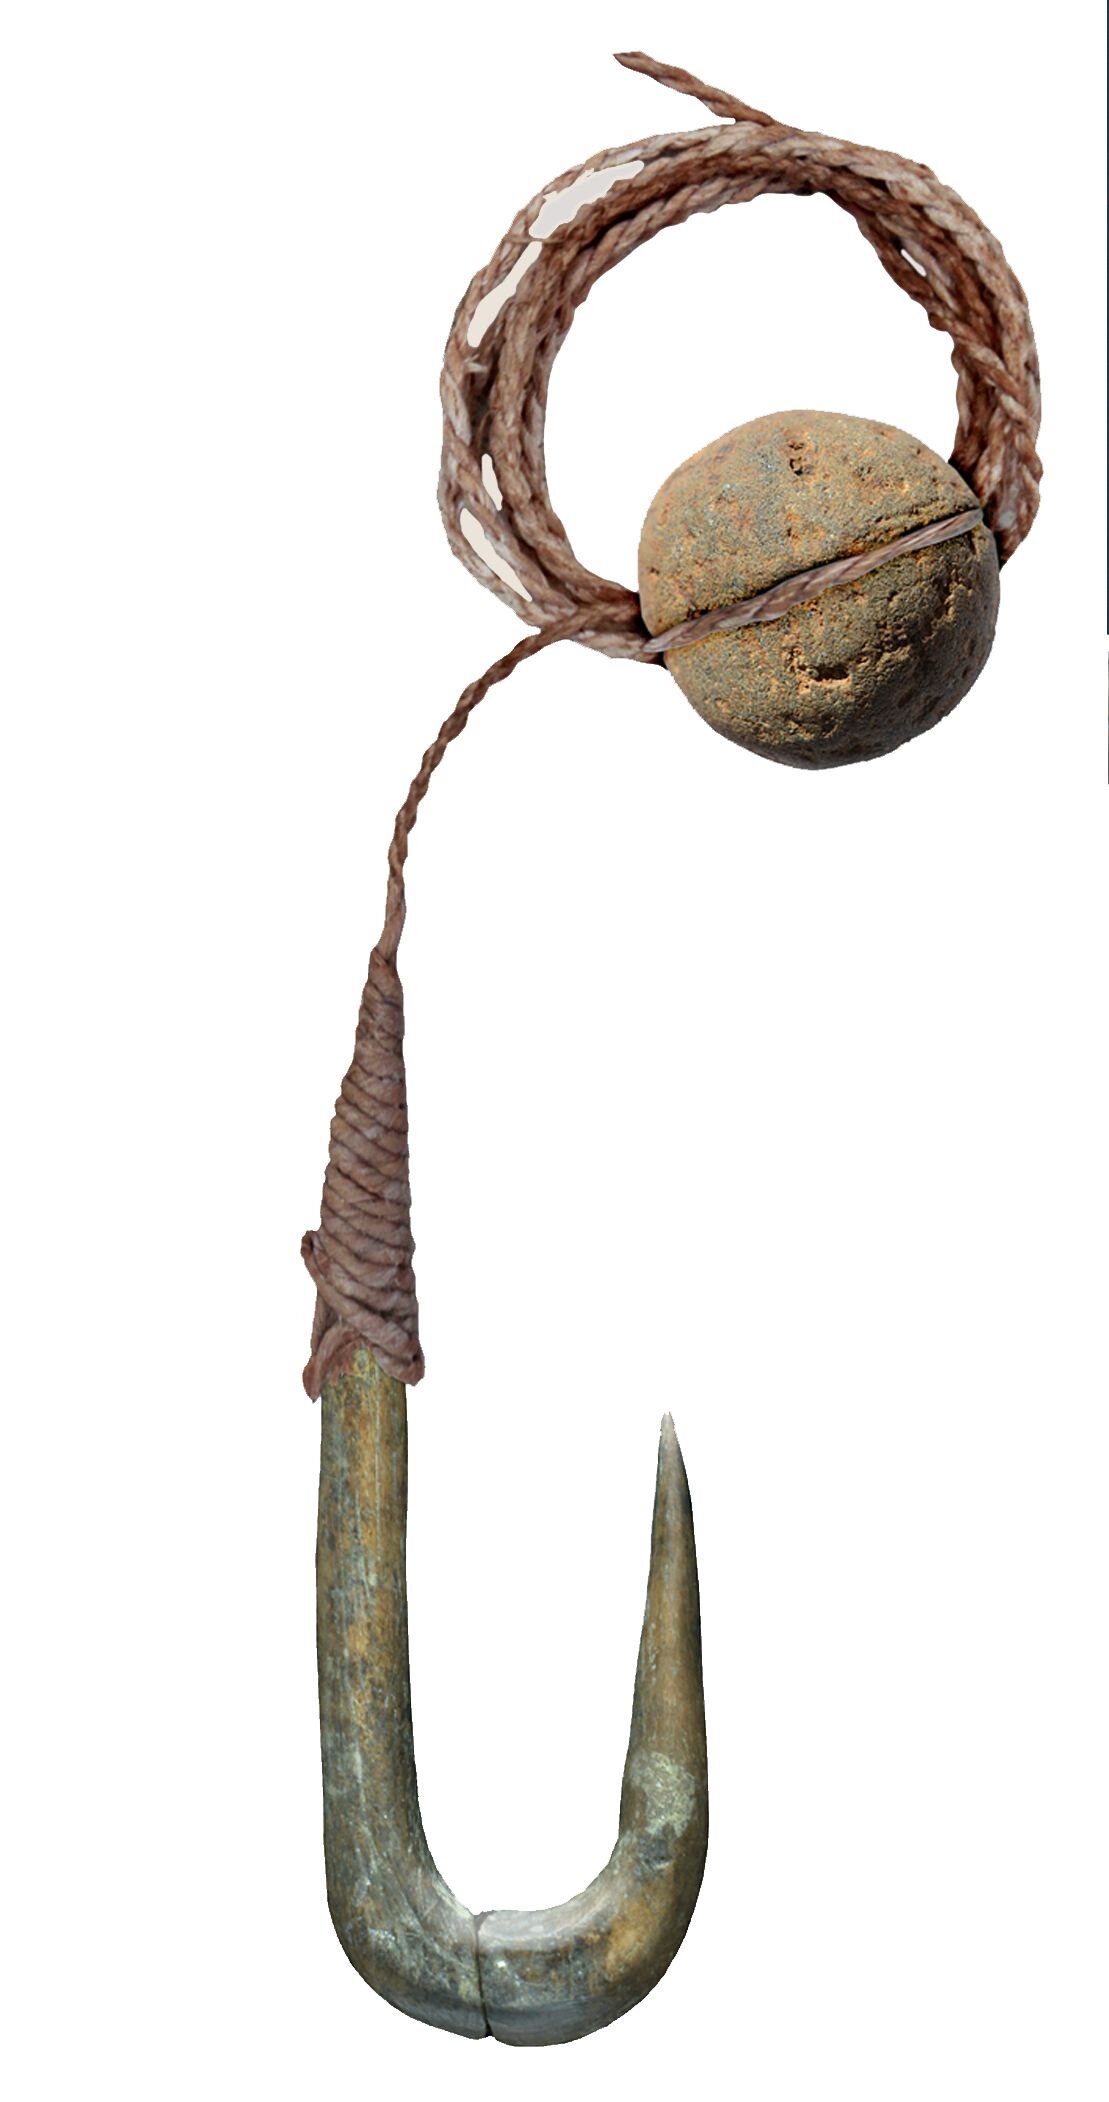 Line and hook fishing techniques in Epipaleolithic Israel